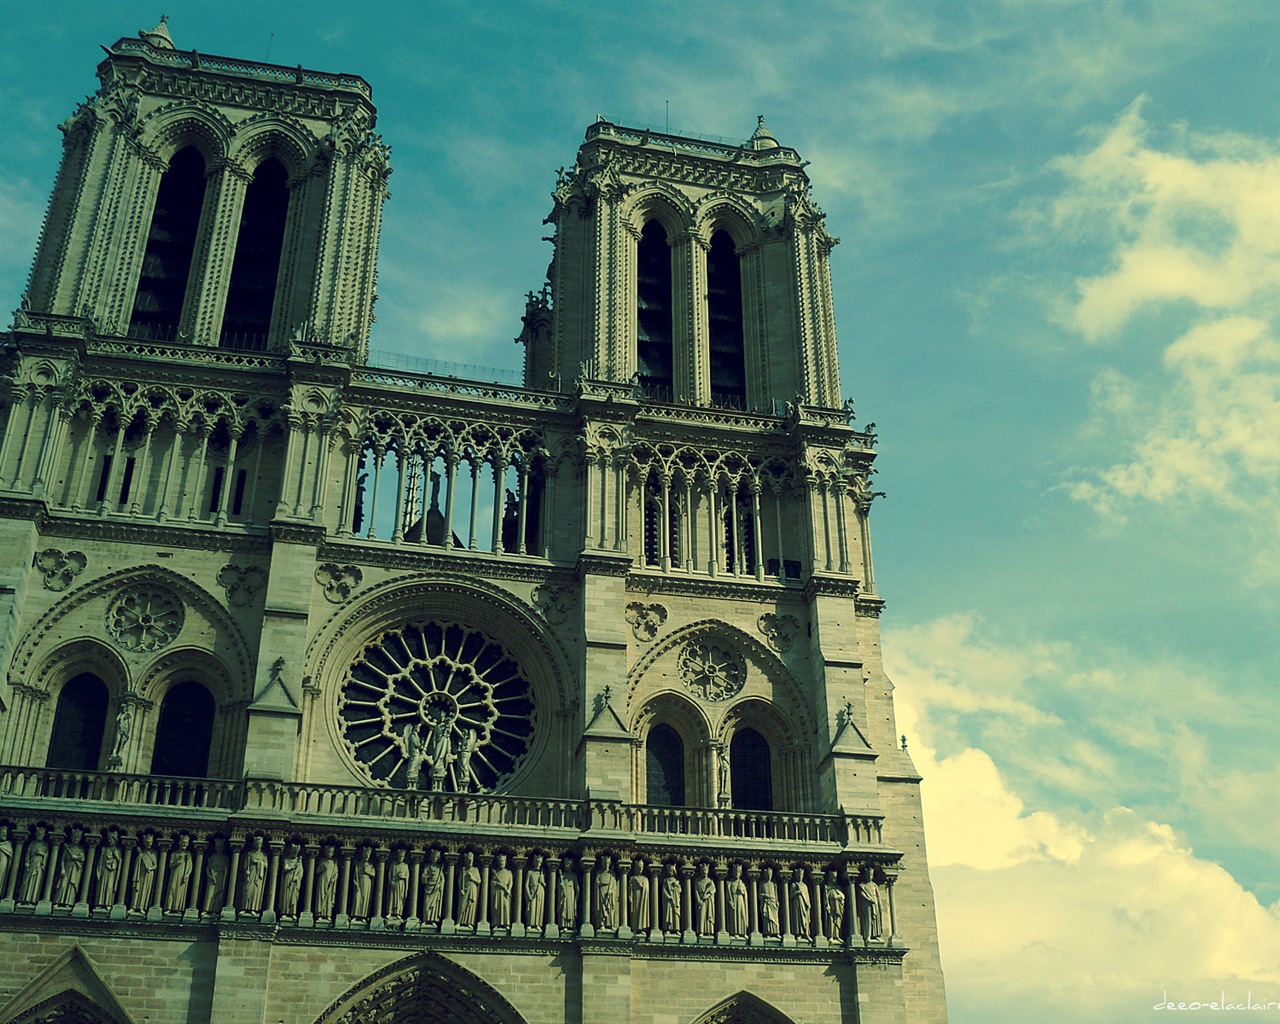 Notre Dame HD Wallpapers #2 - 1280x1024